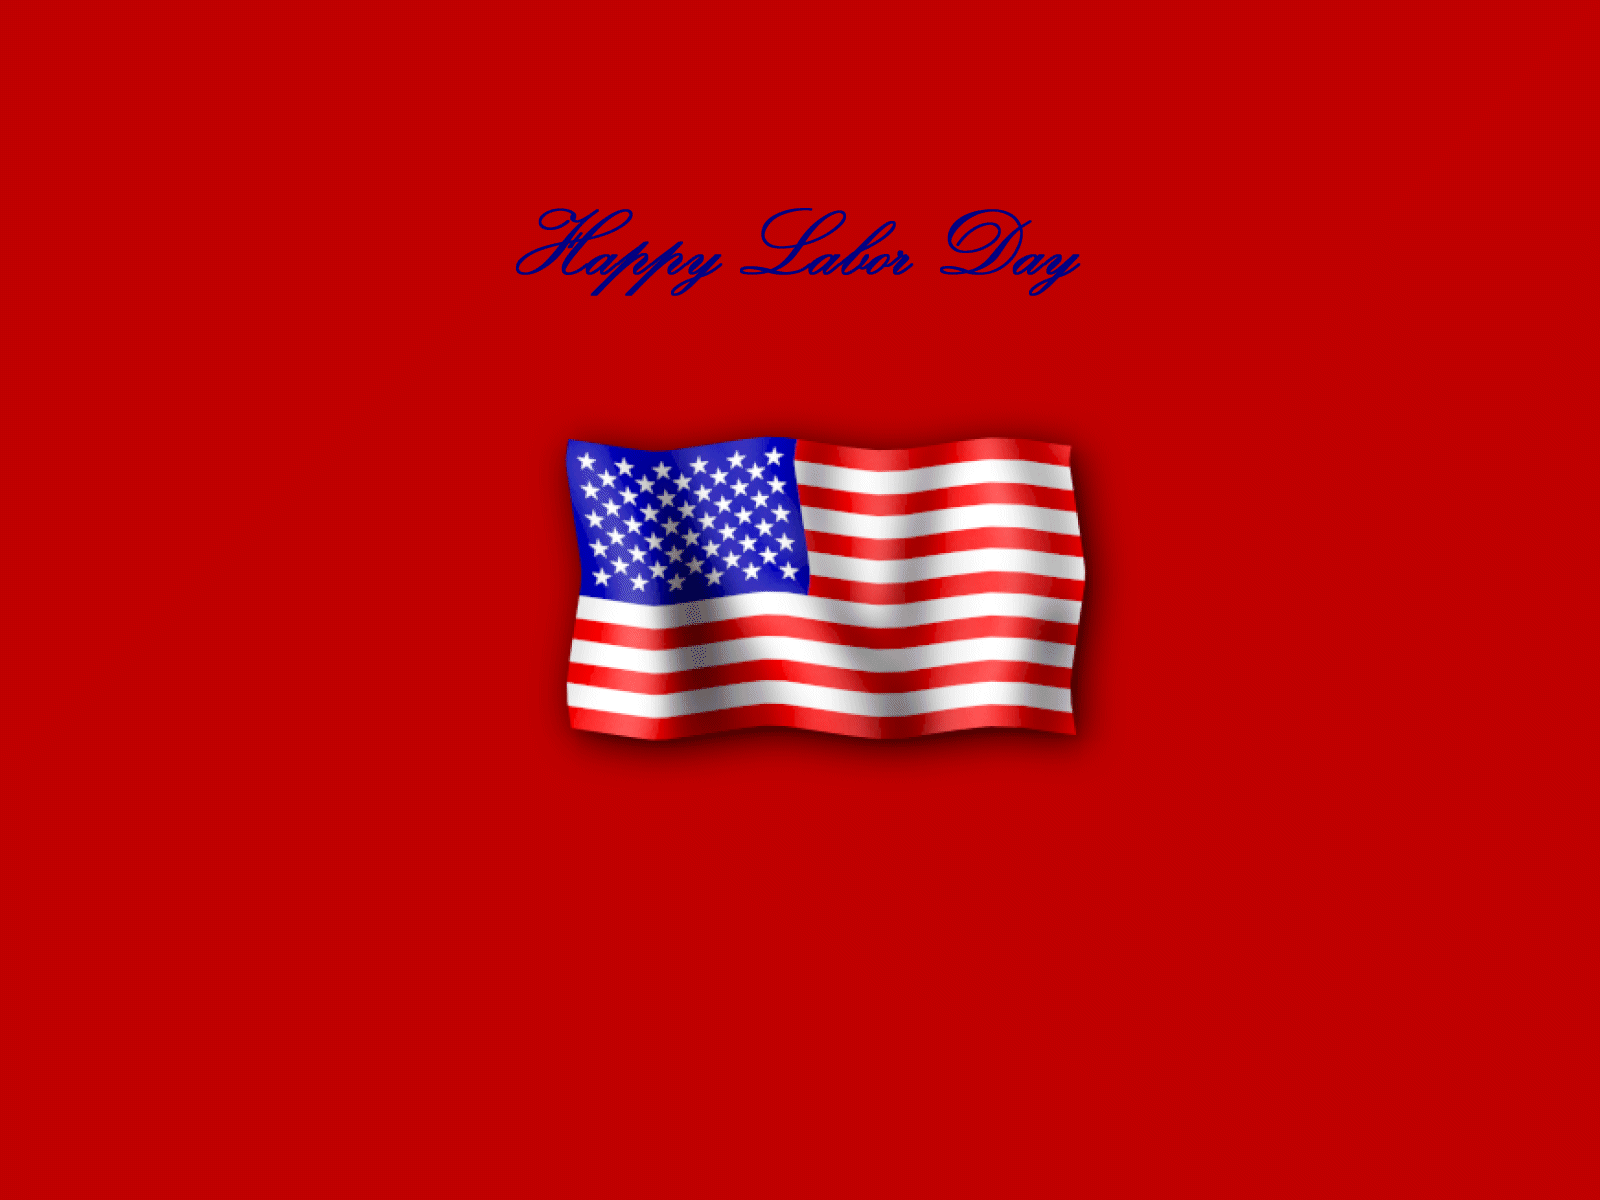 Labor Day Wallpaper Background For Desktop Featuring A Red